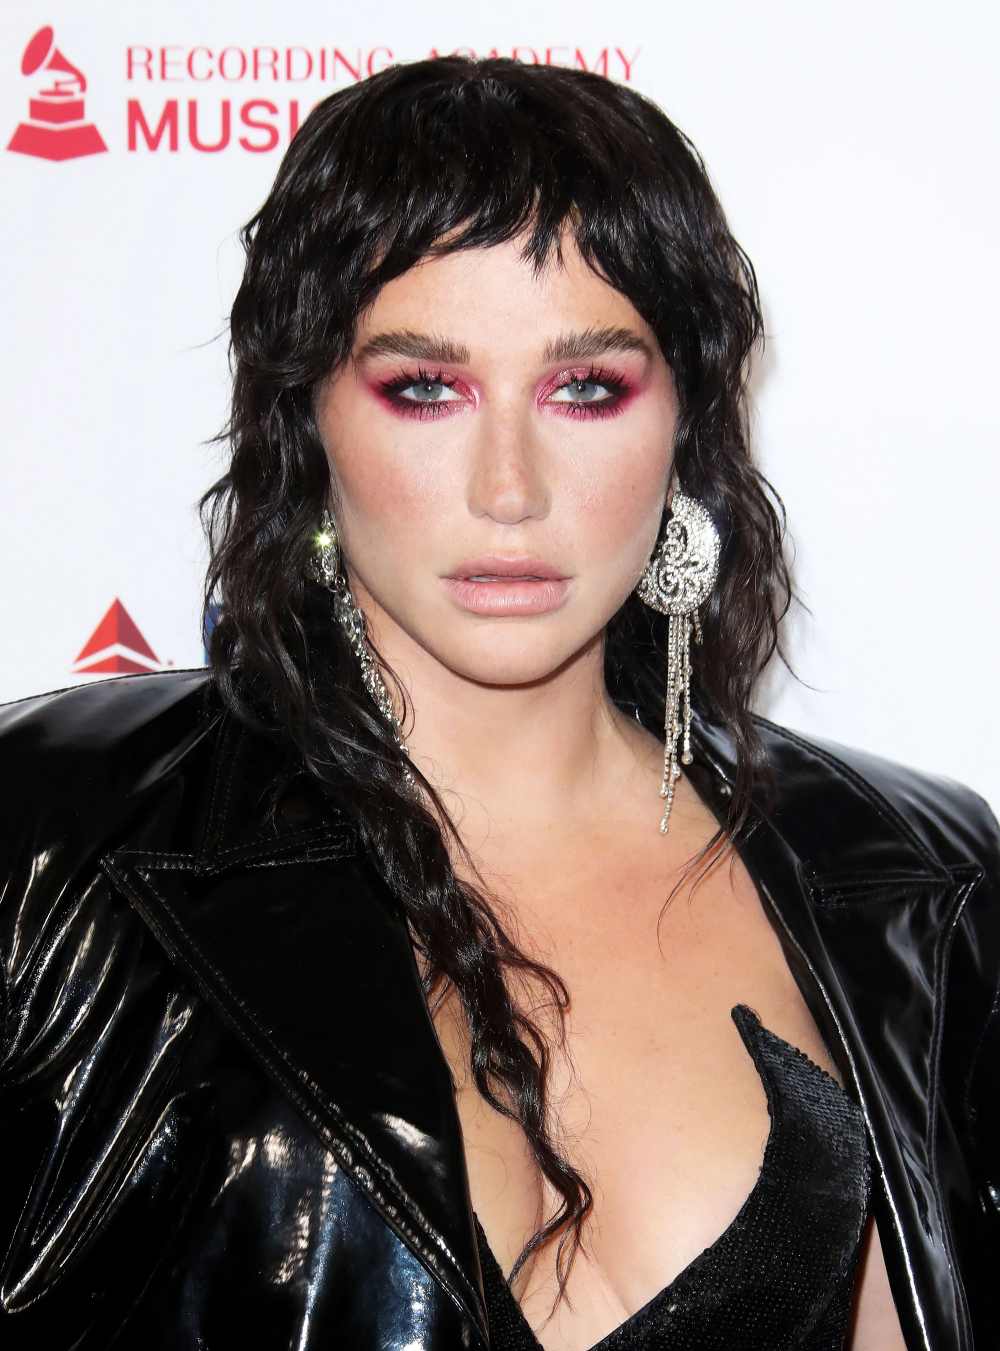 You'll Never Guess What Kesha Did With Men's Beard Dye